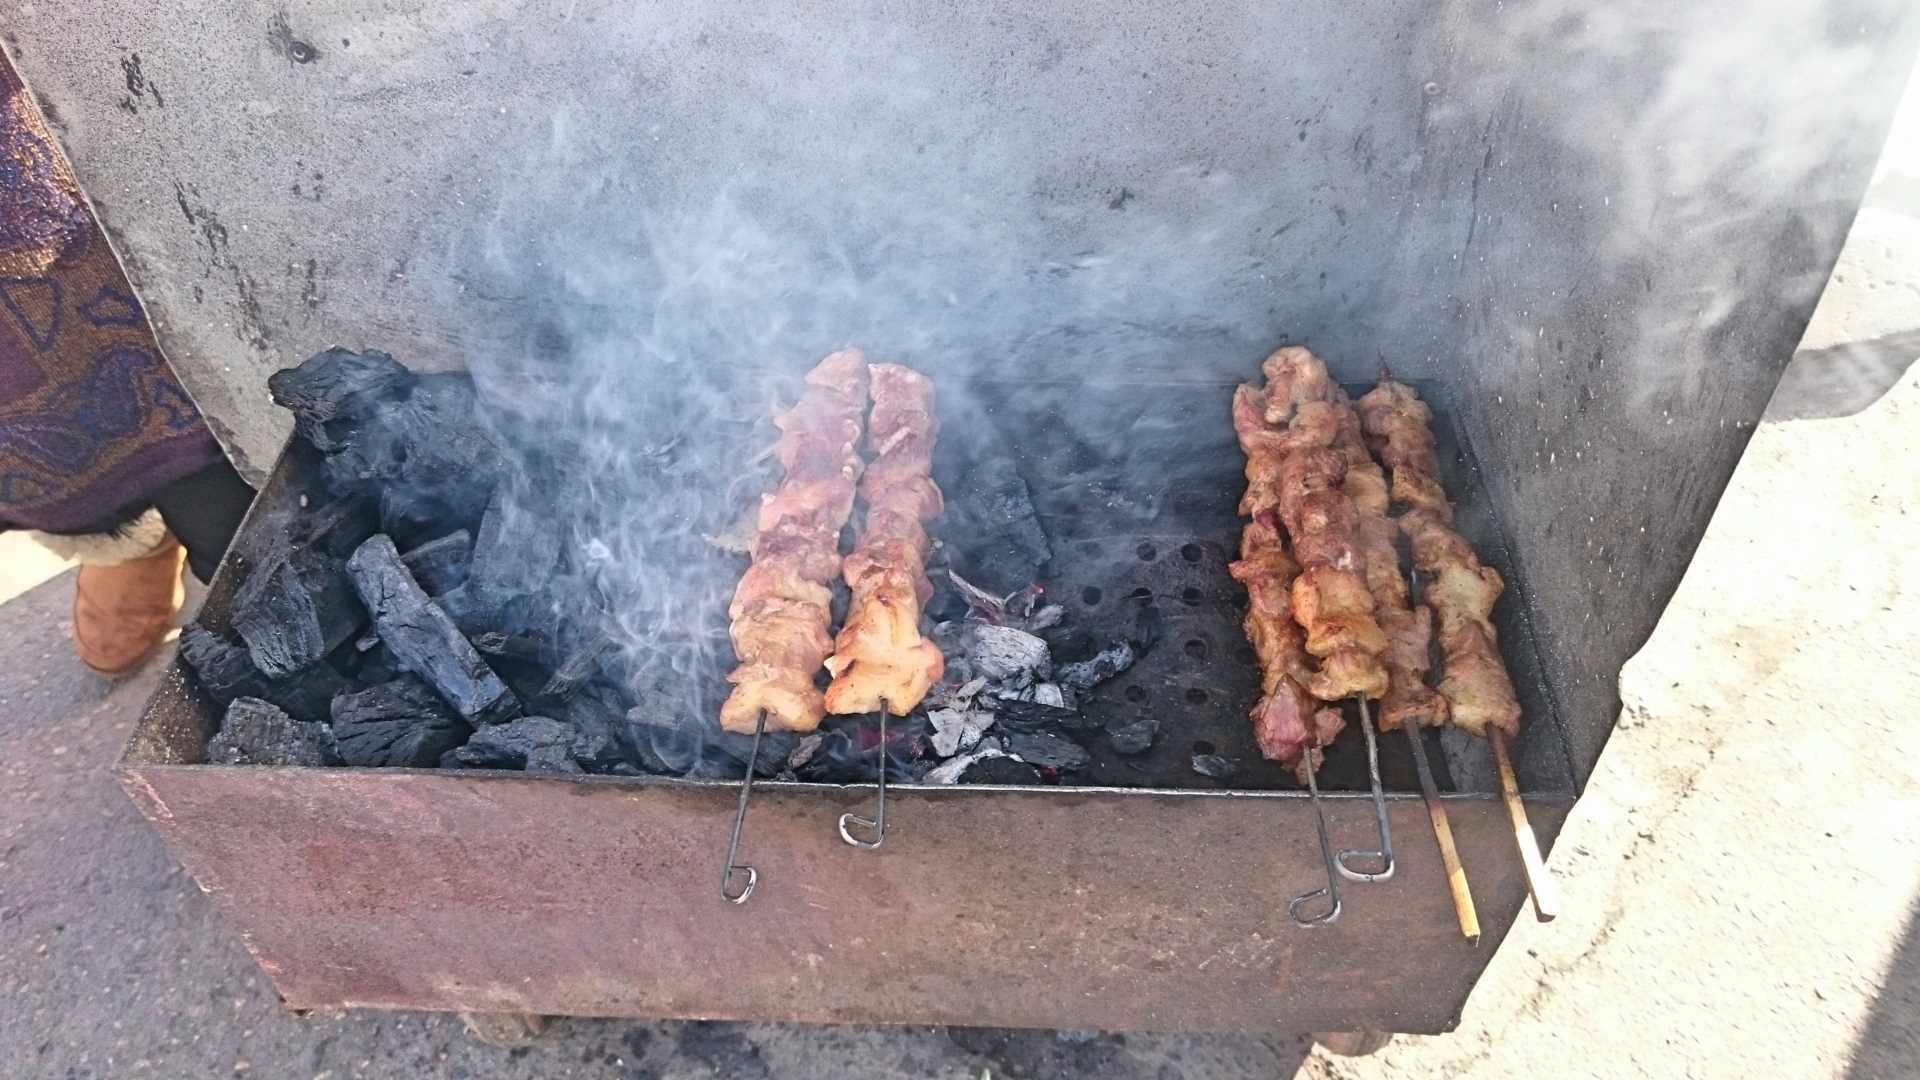 Shashlik, grilled meat typically a lamb, but also pork or beef